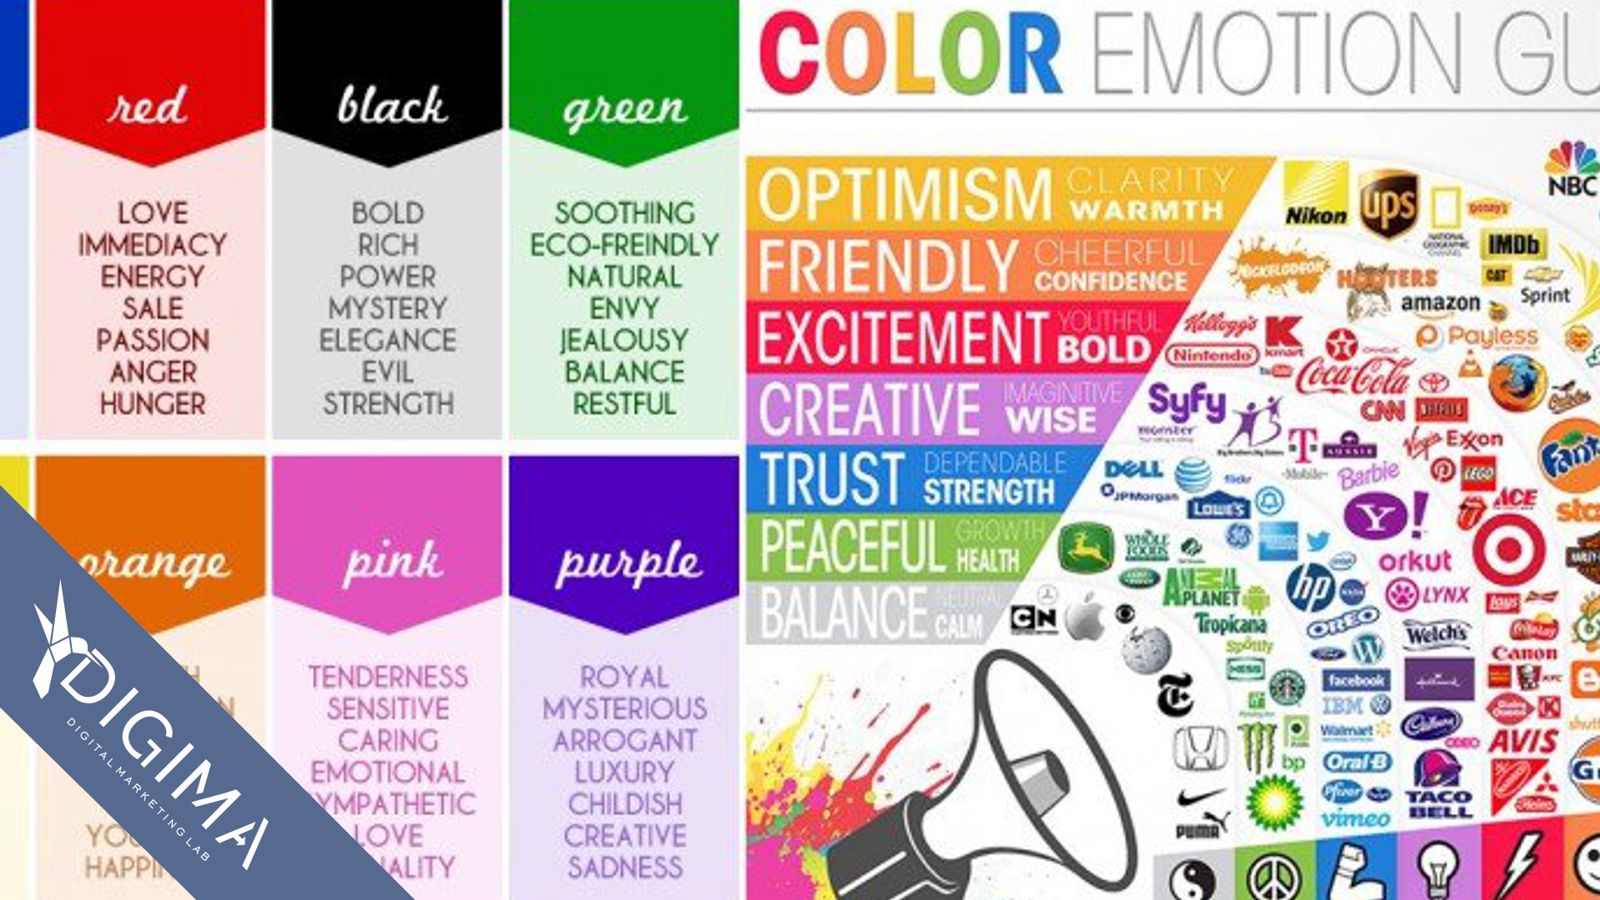 A Designer's Guide To Color Association & Meaning